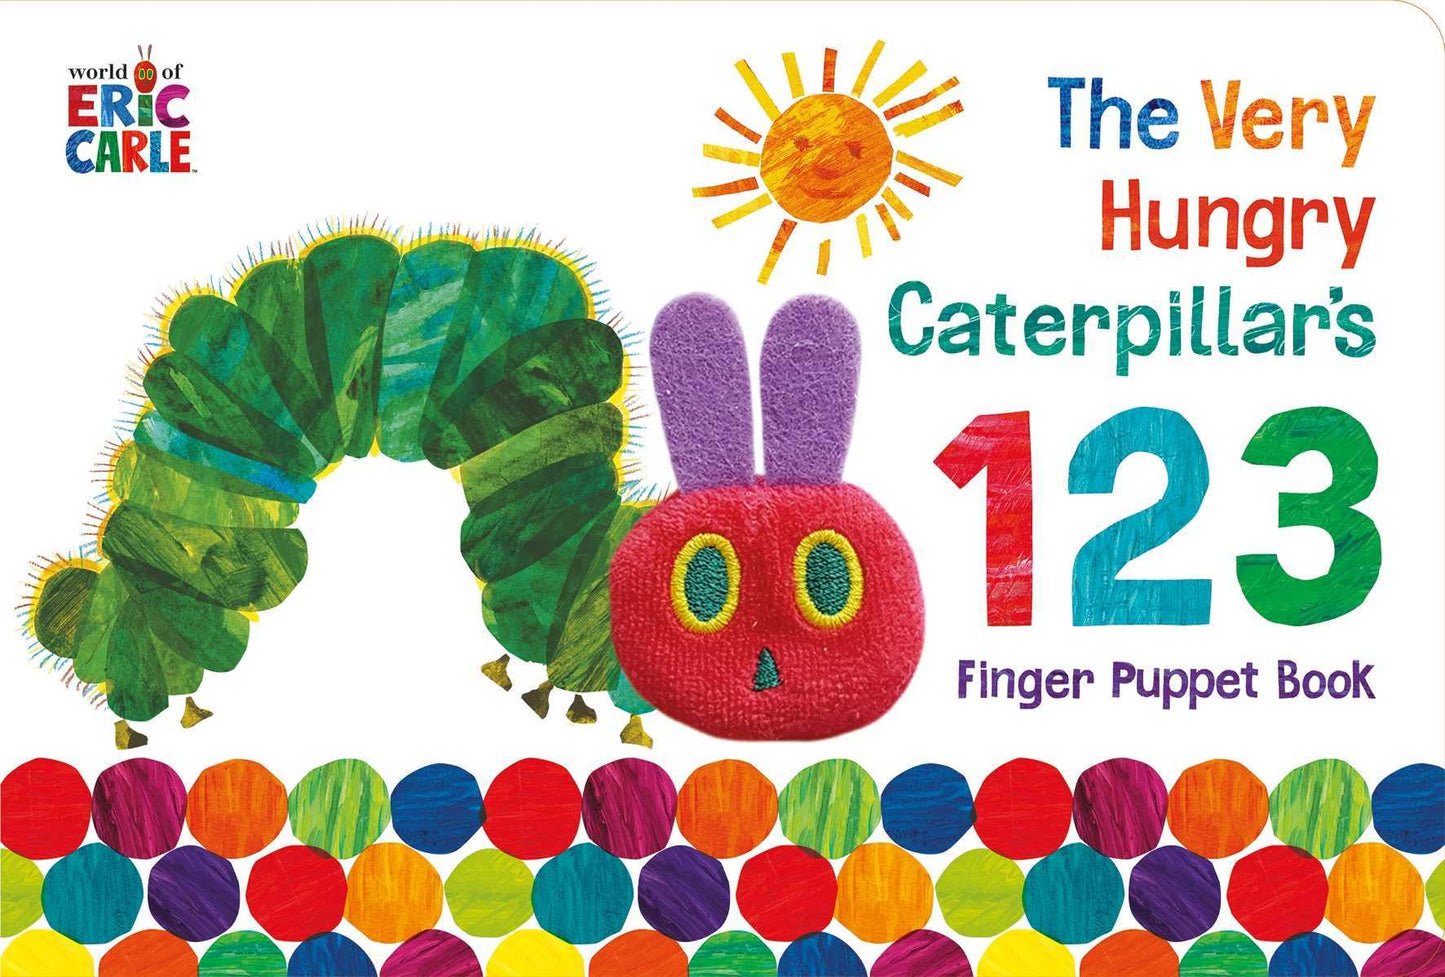 The Very Hungry Caterpillar Finger Puppet Book 123 Counting Book. Series: The Very Hungry Caterpillar - WERONE